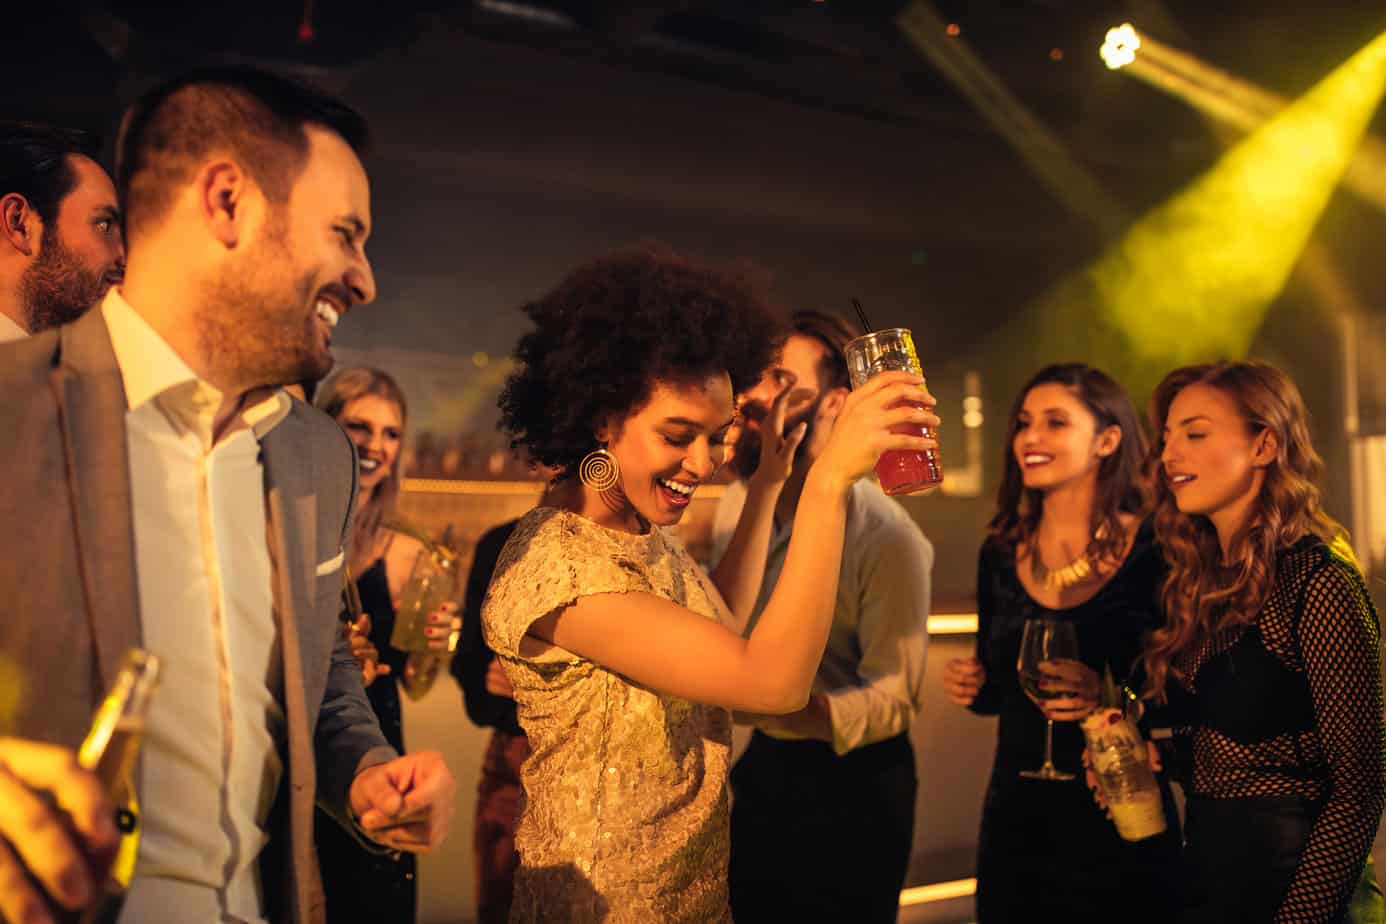 Group of young cheerful friends partying at a nightclub